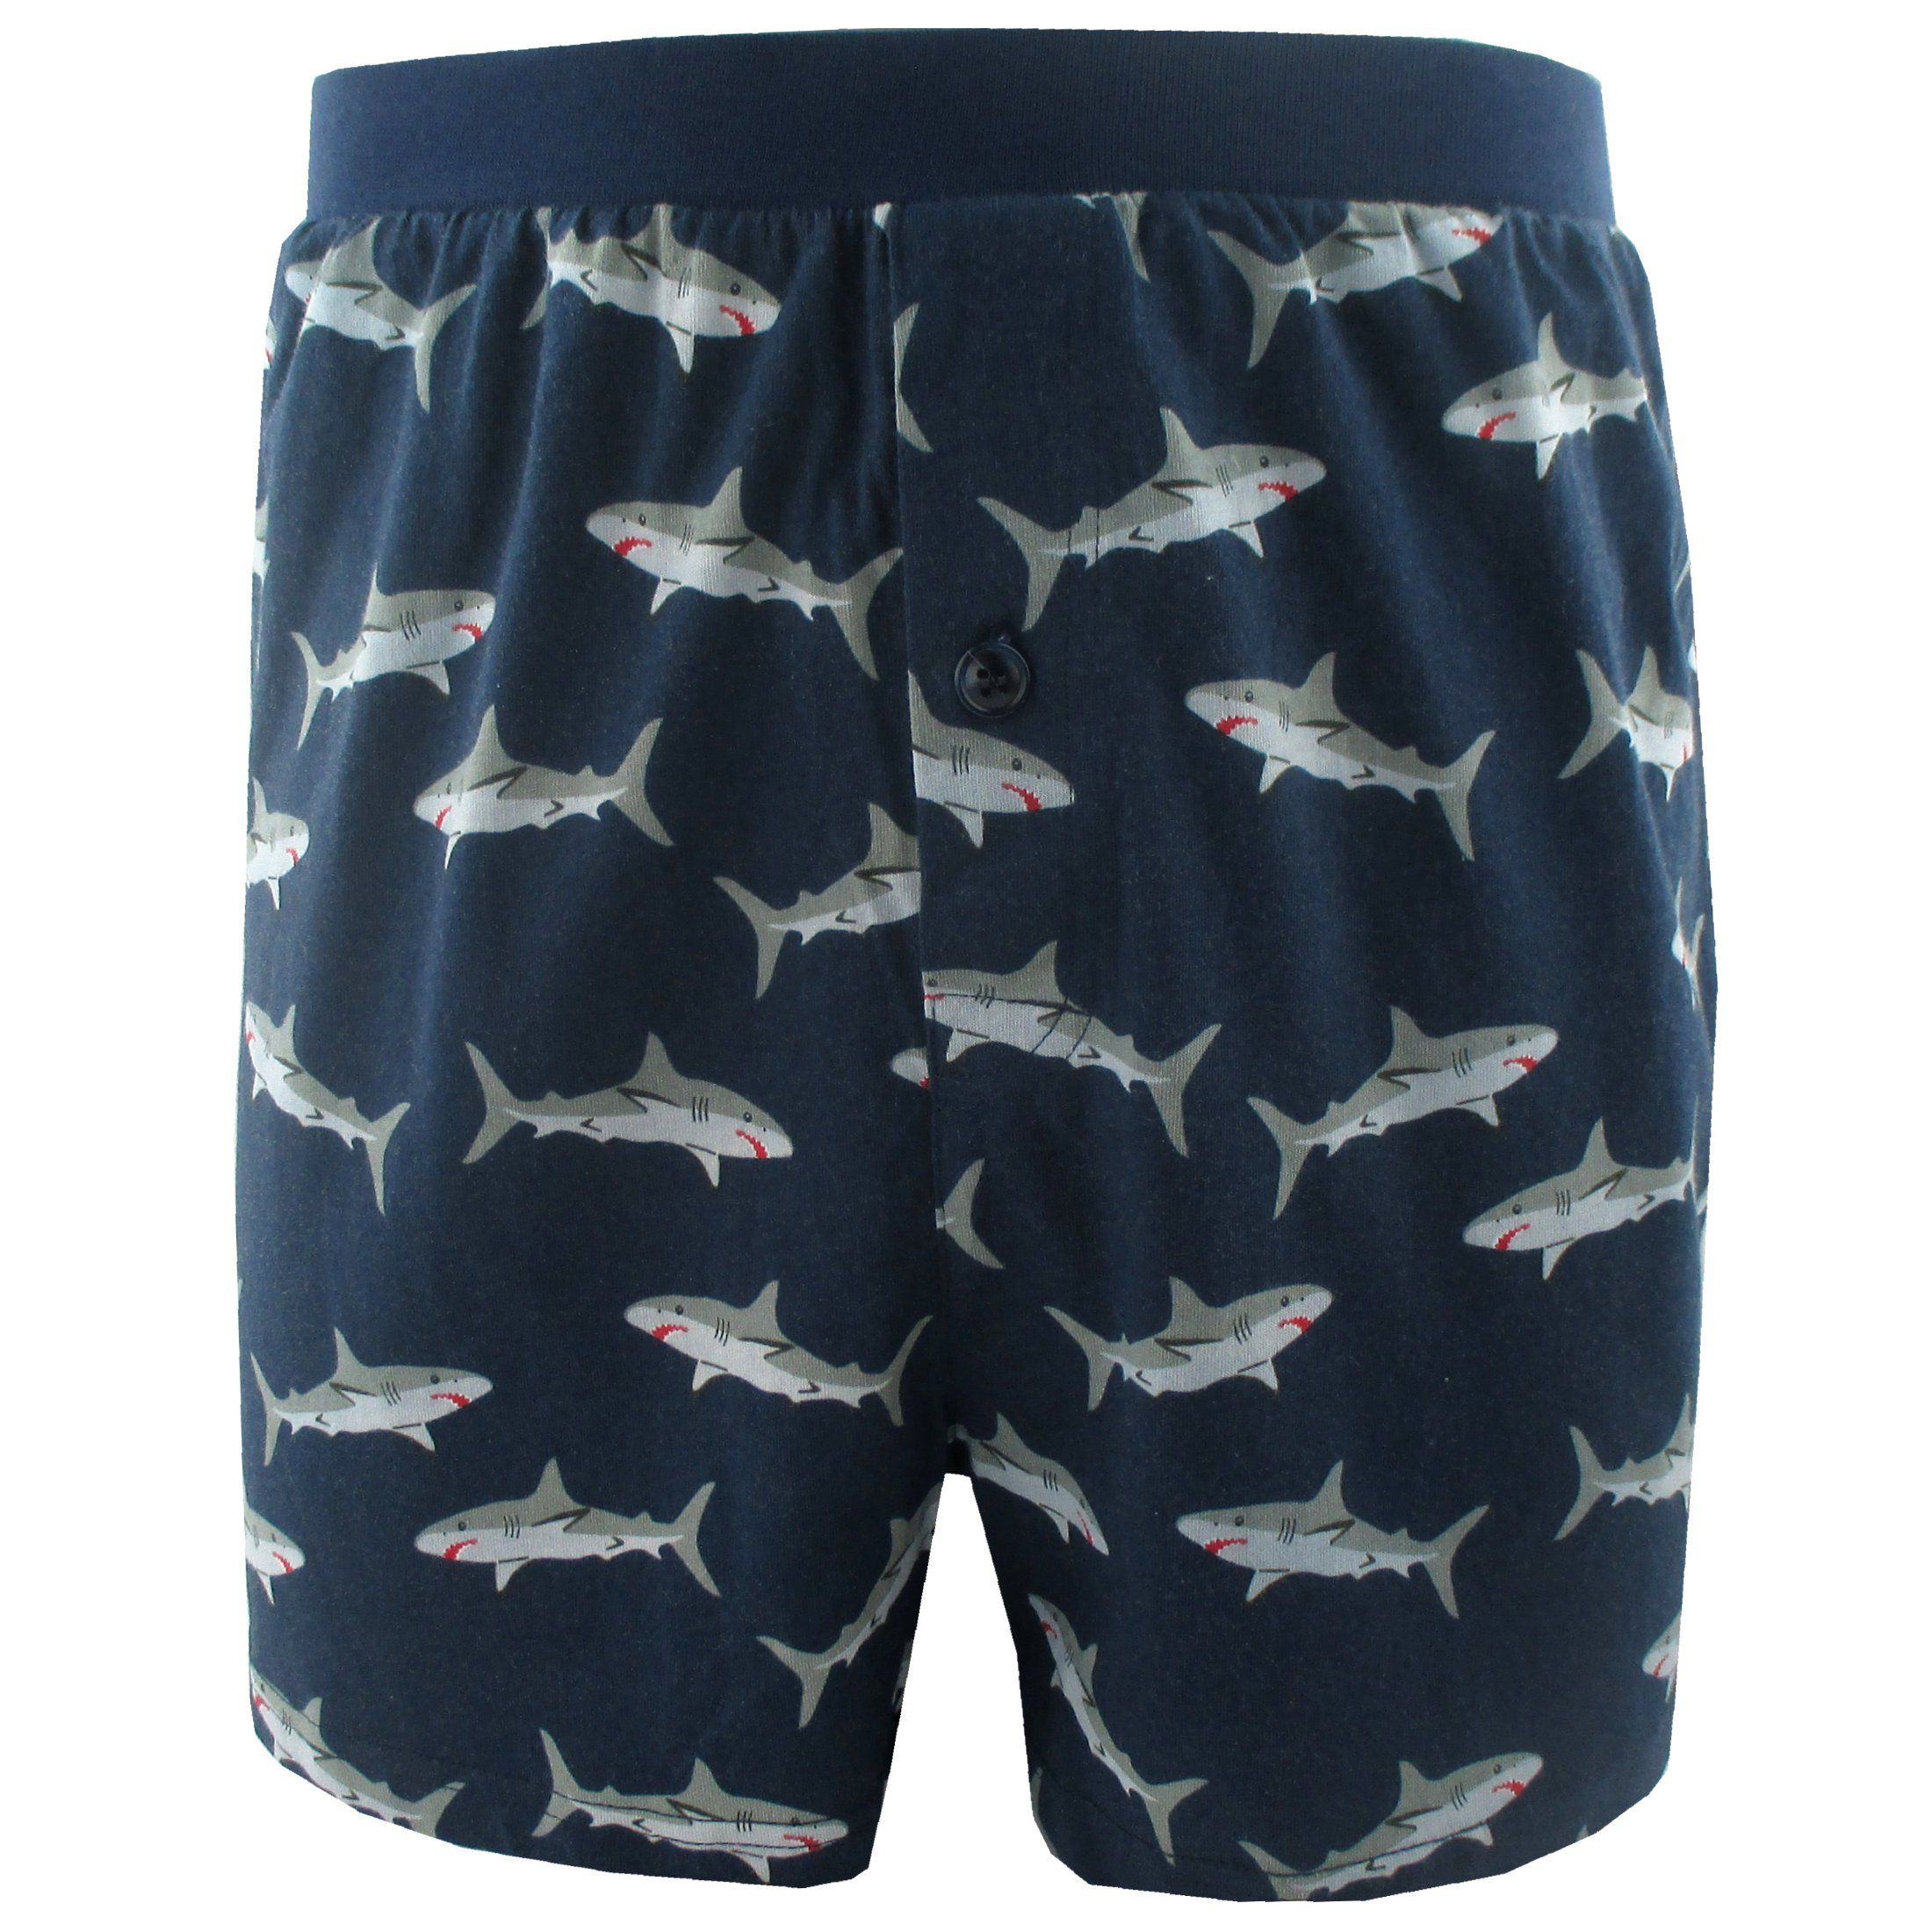 Classic Shark All Over Print Navy Blue Cotton Knit Boxer Shorts for Men